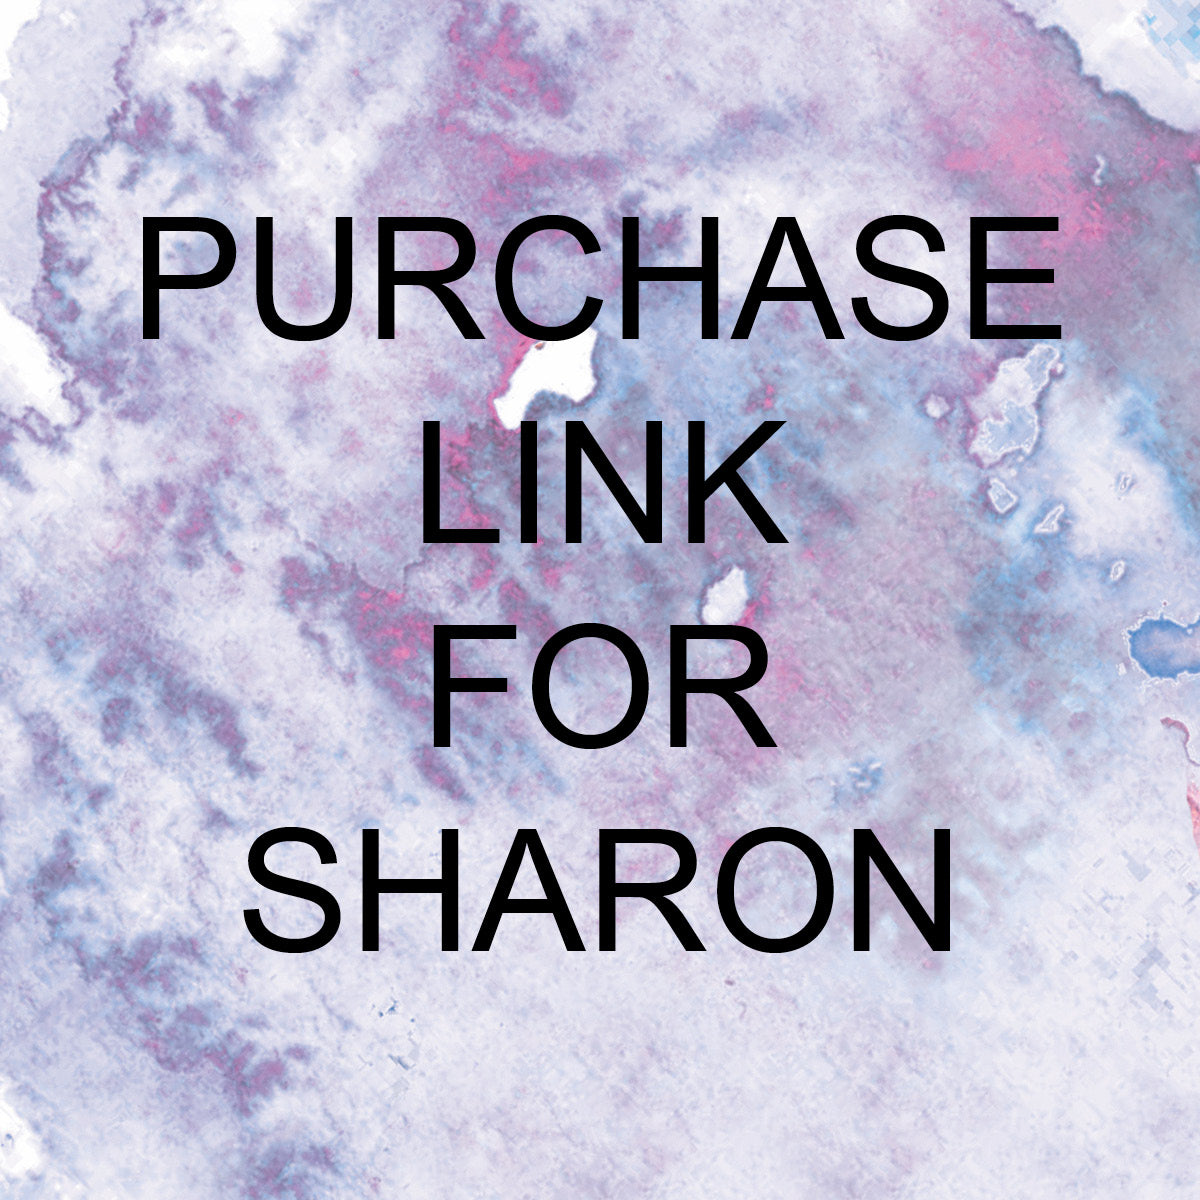 Purchase Link for Sharon